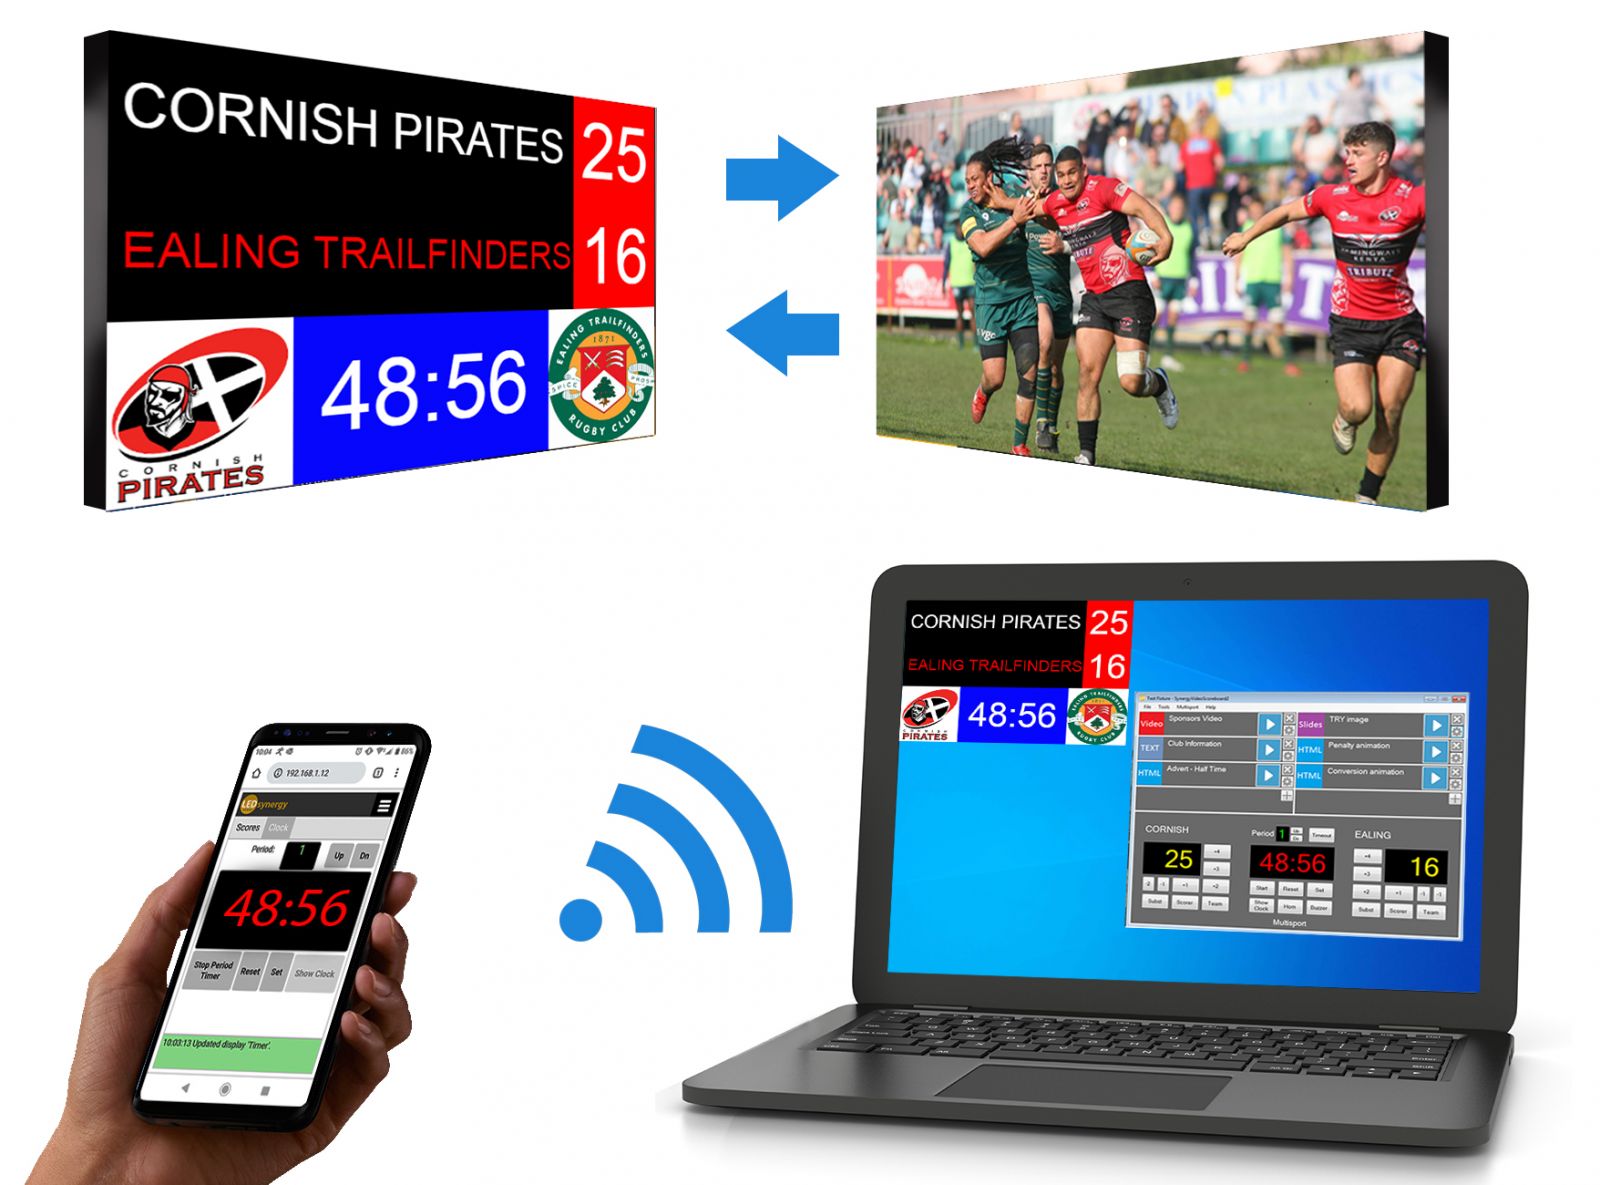 mobile phone with laptop and scoreboard - software and switch screens - rugby